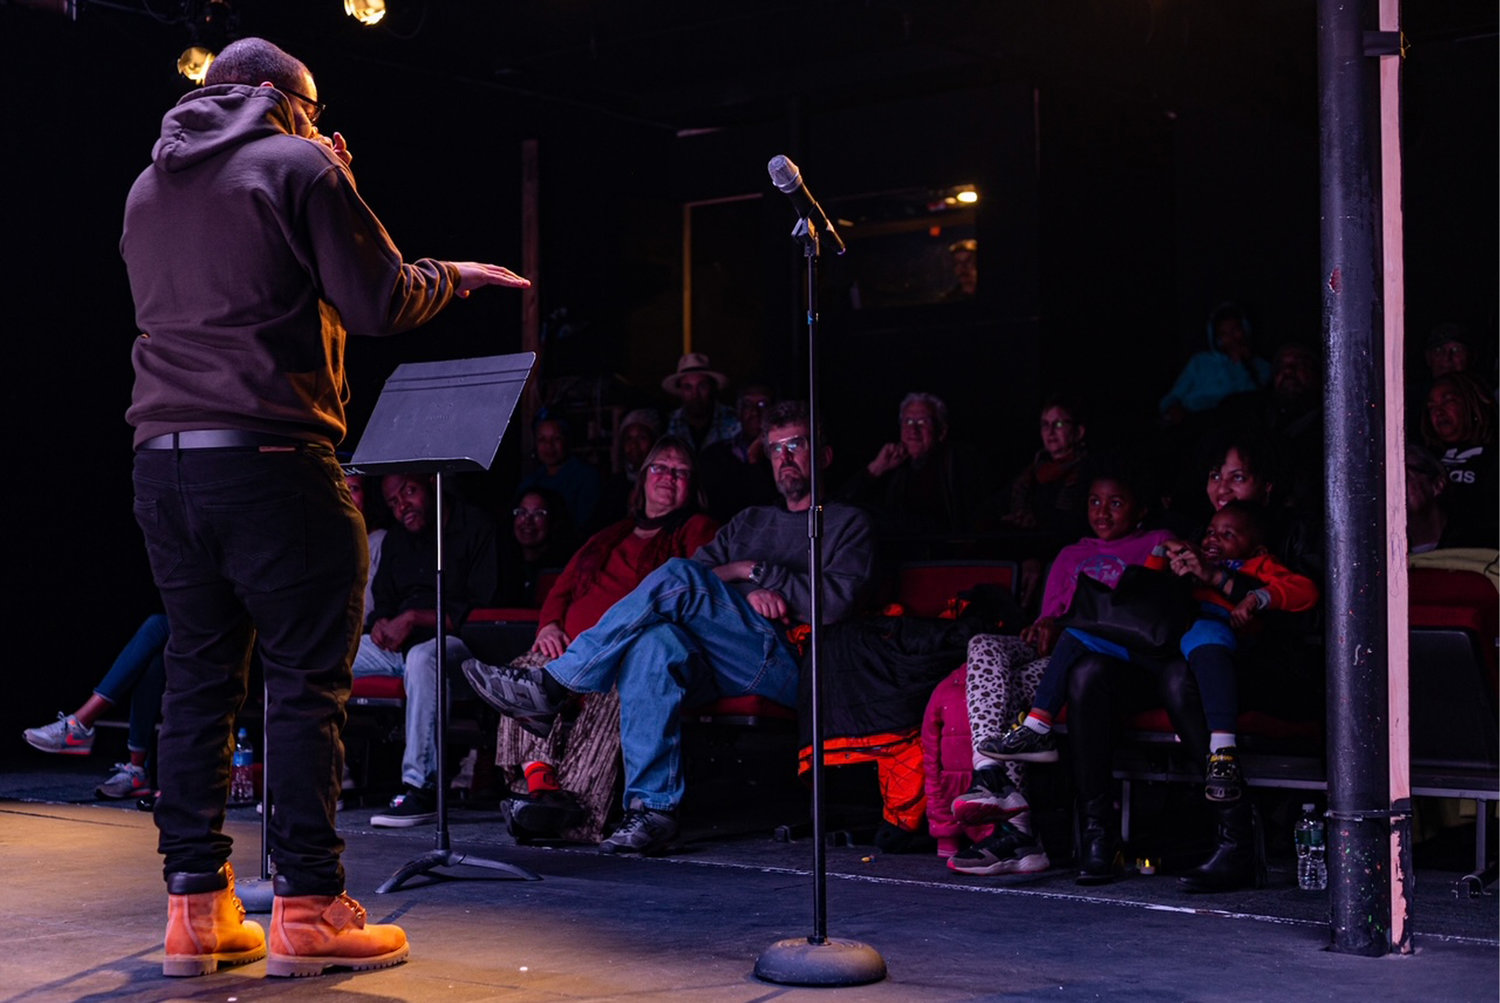 Poet Rudy Cabrera performs an original piece during Rise to Black at Mixed Magic Theatre